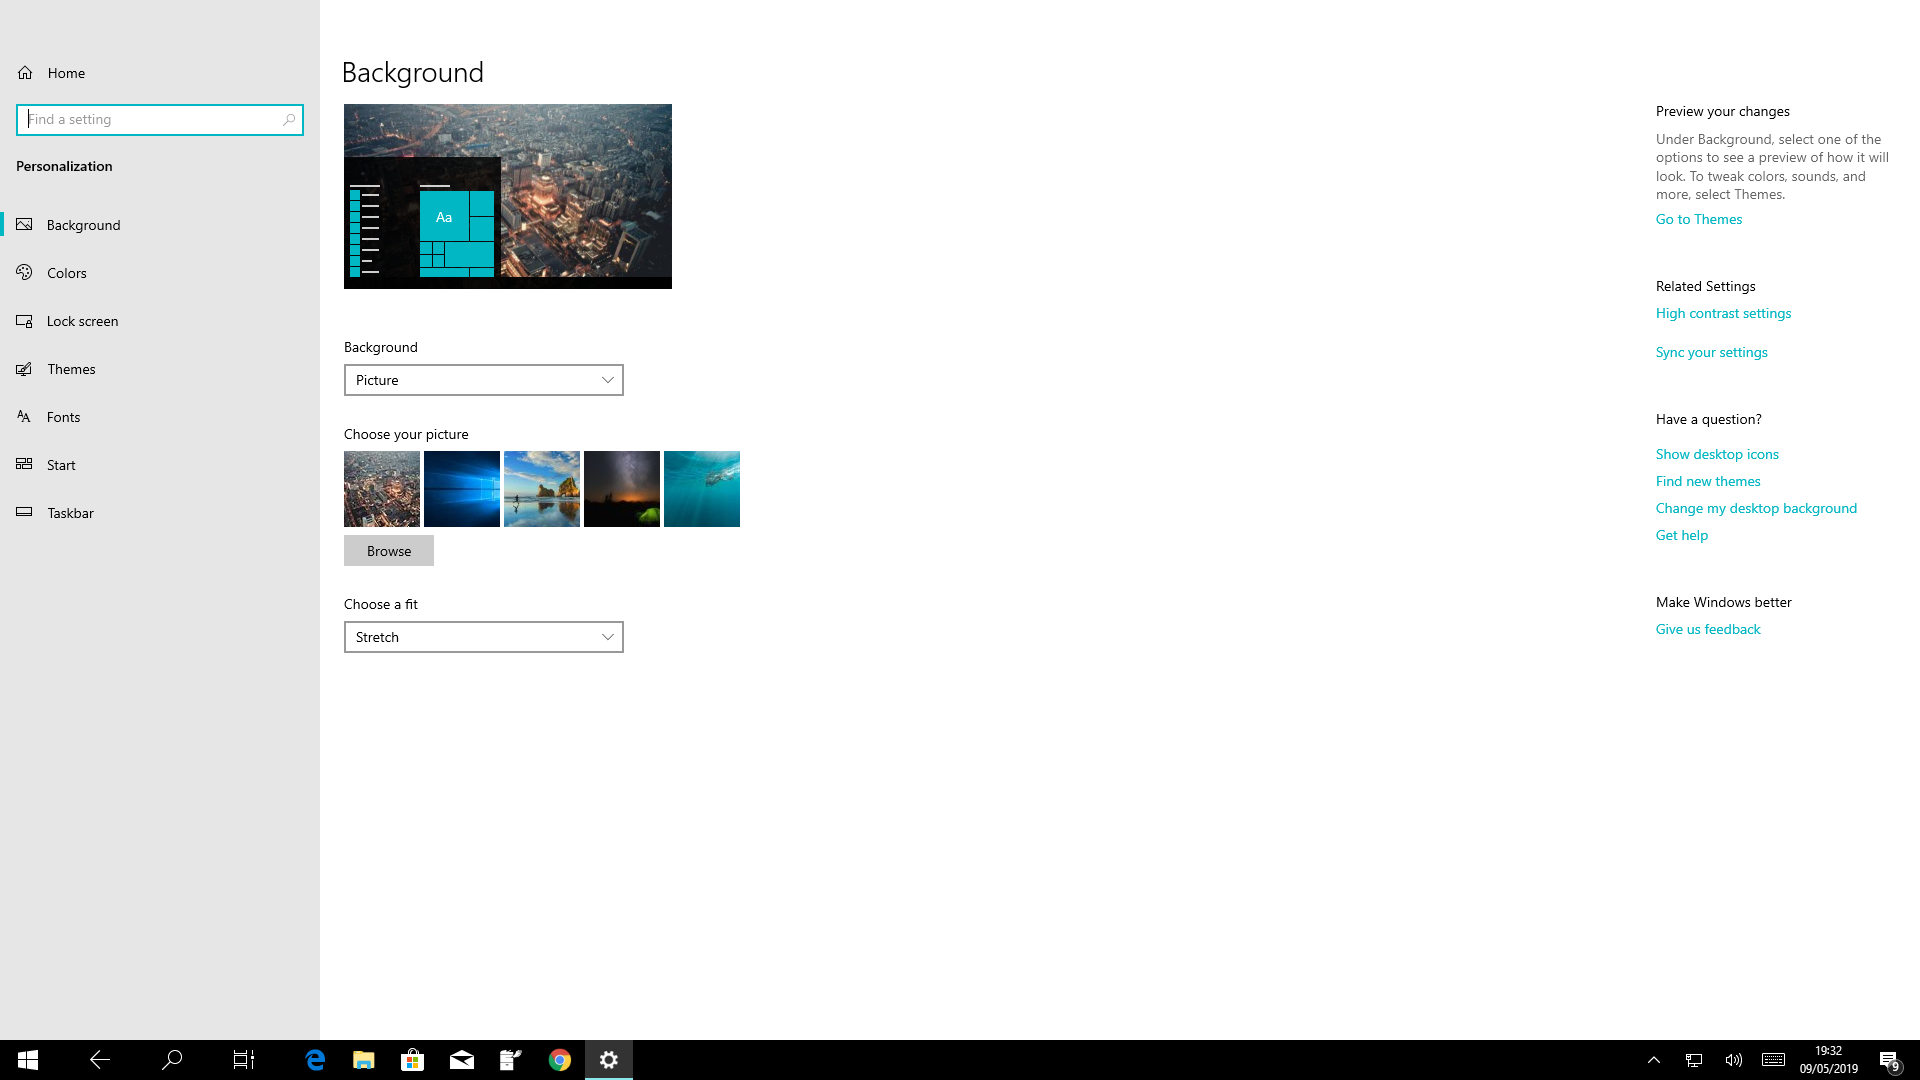 Windows 10 changed Start menu style and I can't seem to go back 43c565be-17d8-4ad8-8cf7-40c8de82b057?upload=true.png